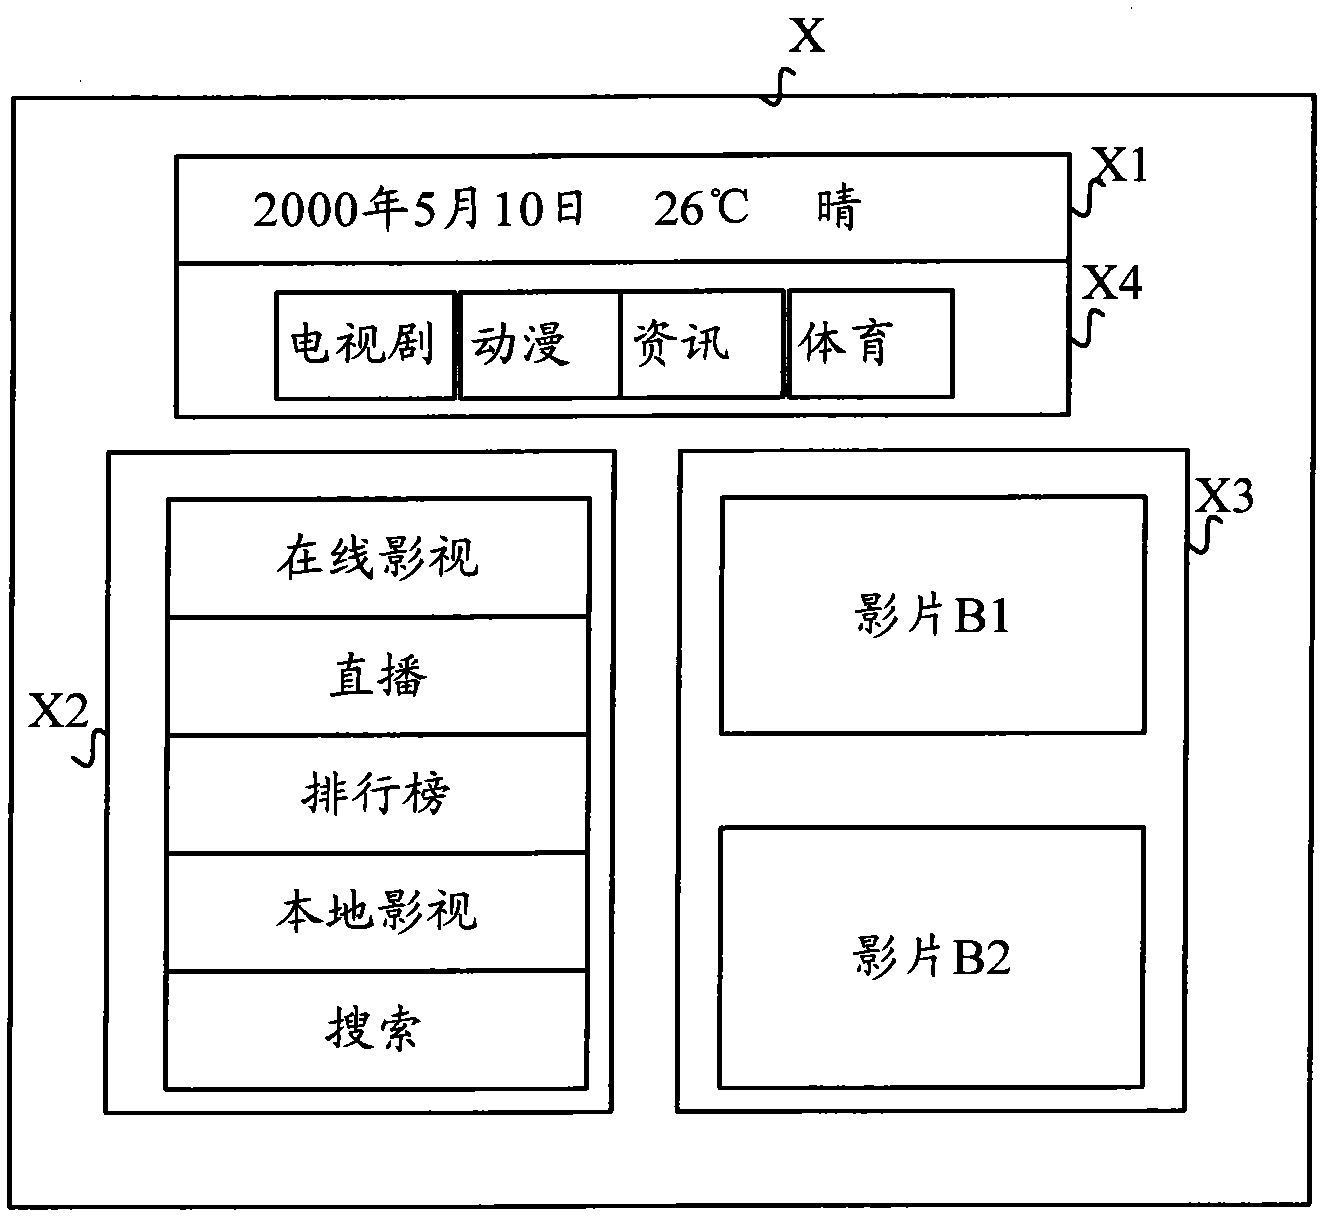 Method and device for selecting display object in display interface, as well as equipment